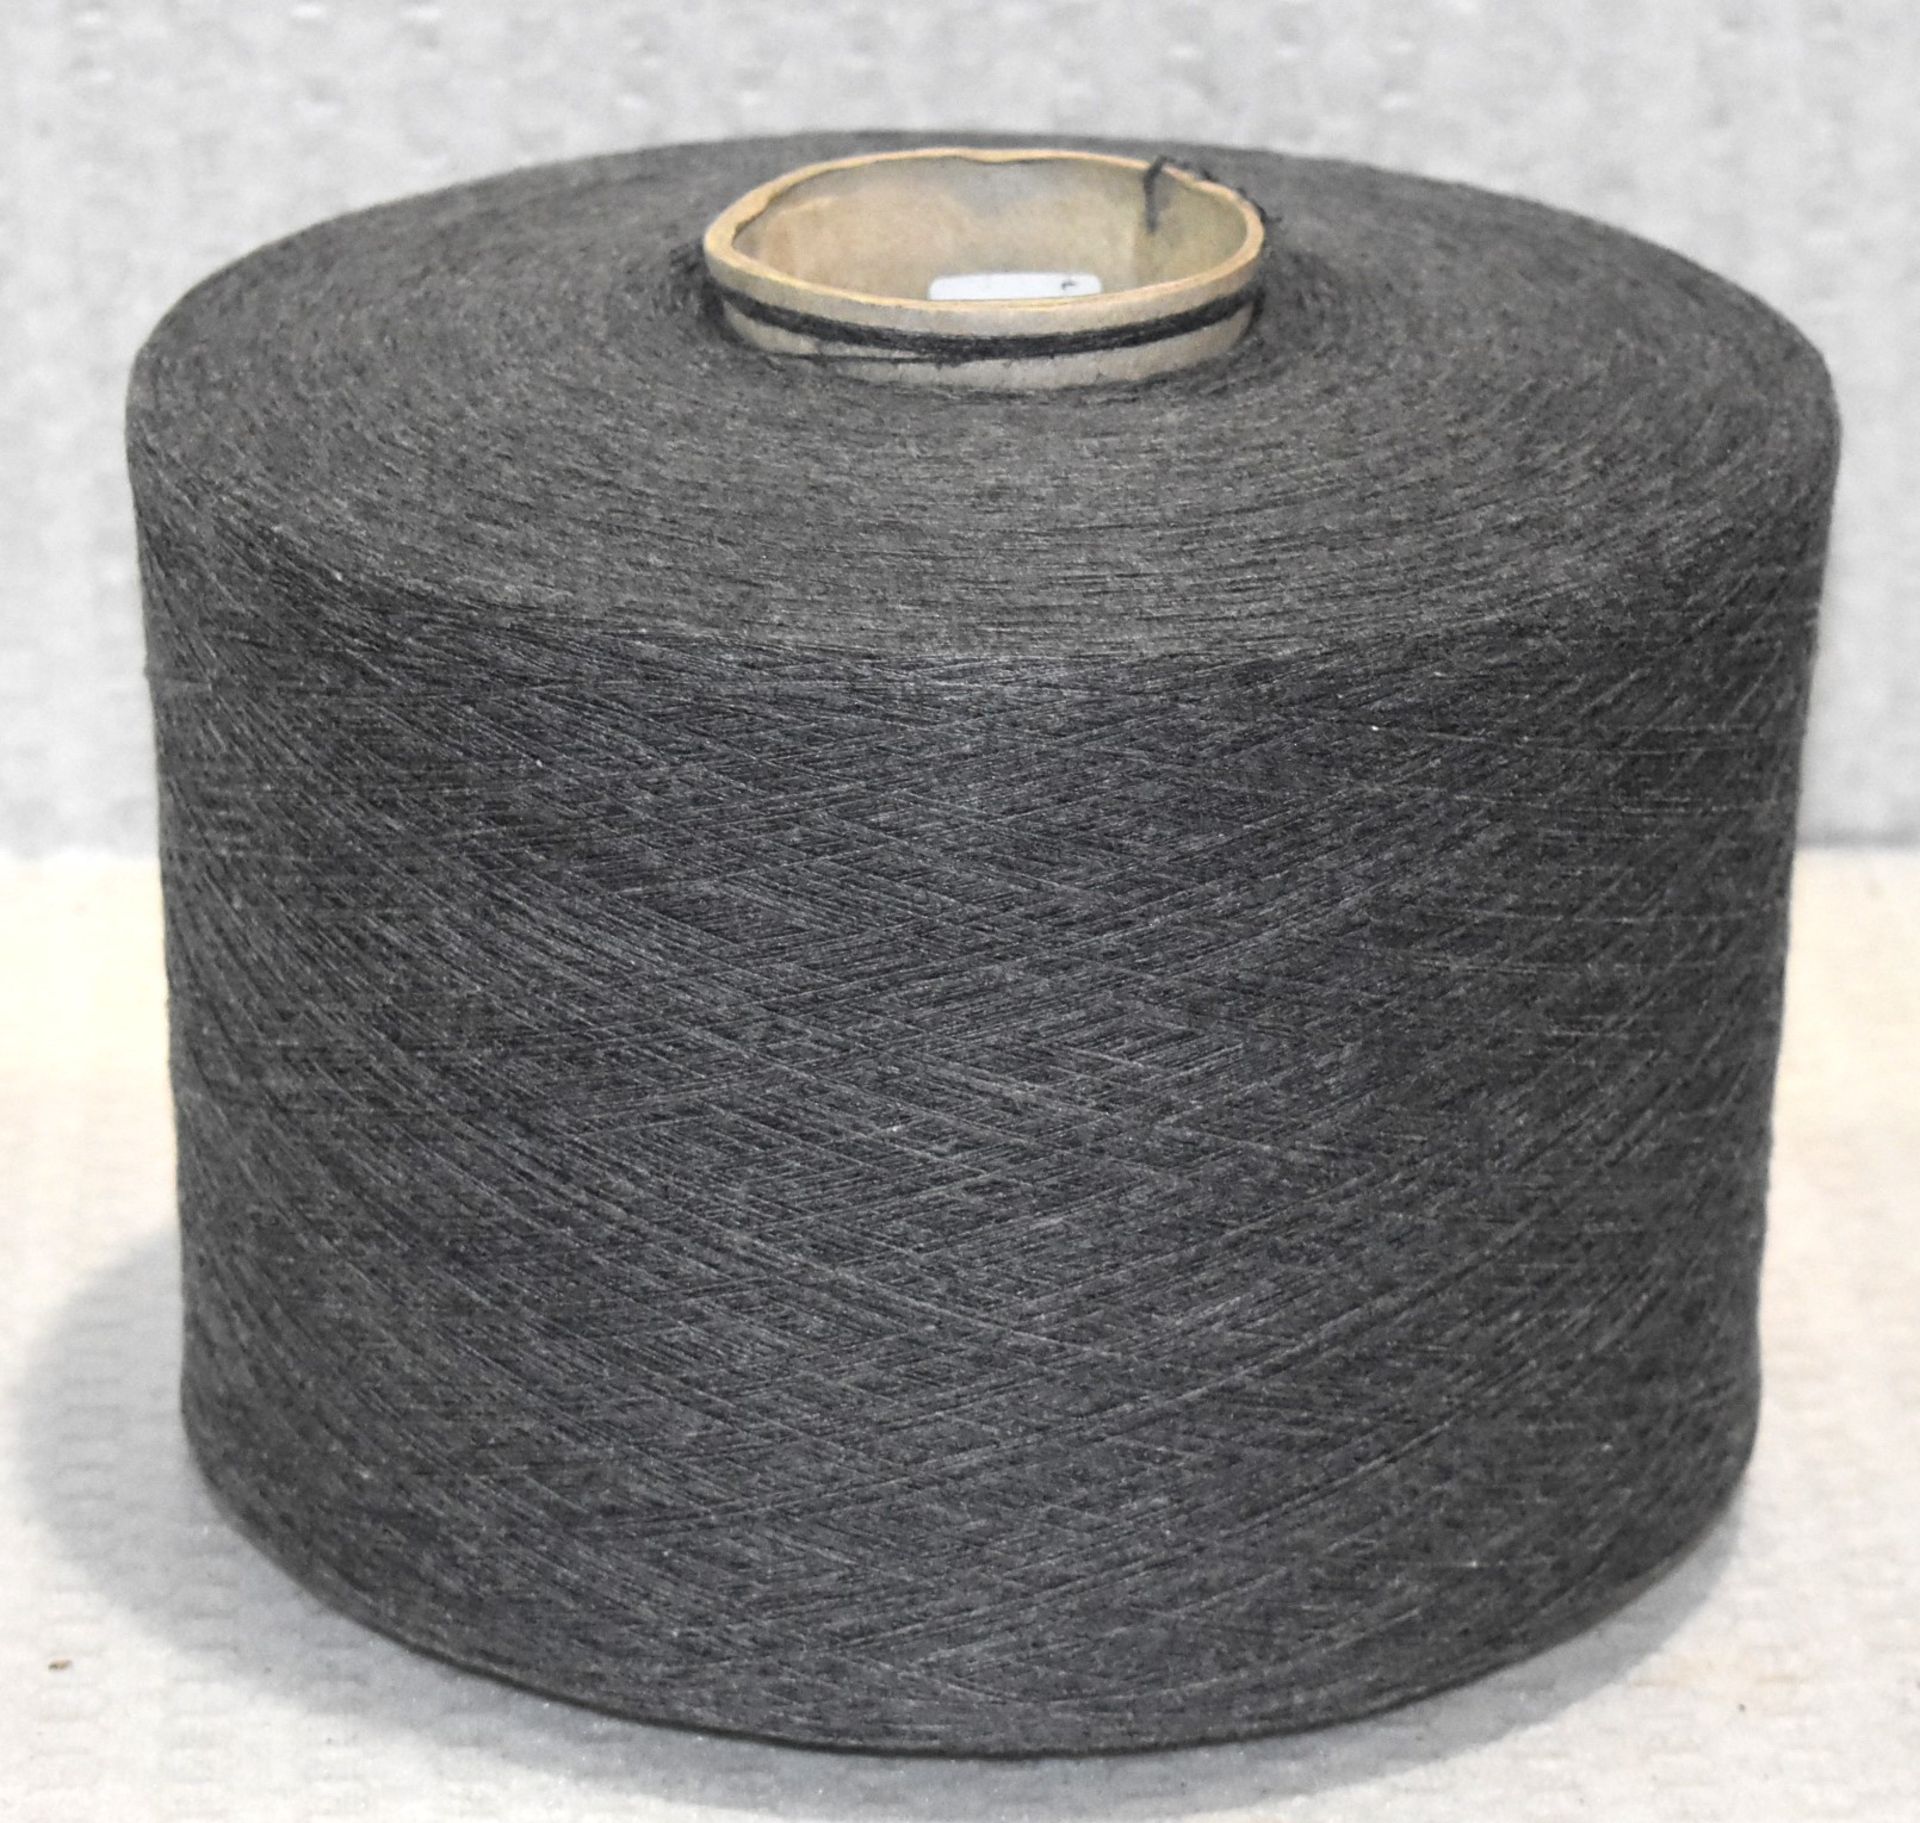 10 x Cones of 1/13 MicroCotton Knitting Yarn - Mid Grey - Approx Weight: 2,500g - New Stock ABL Yarn - Image 8 of 17